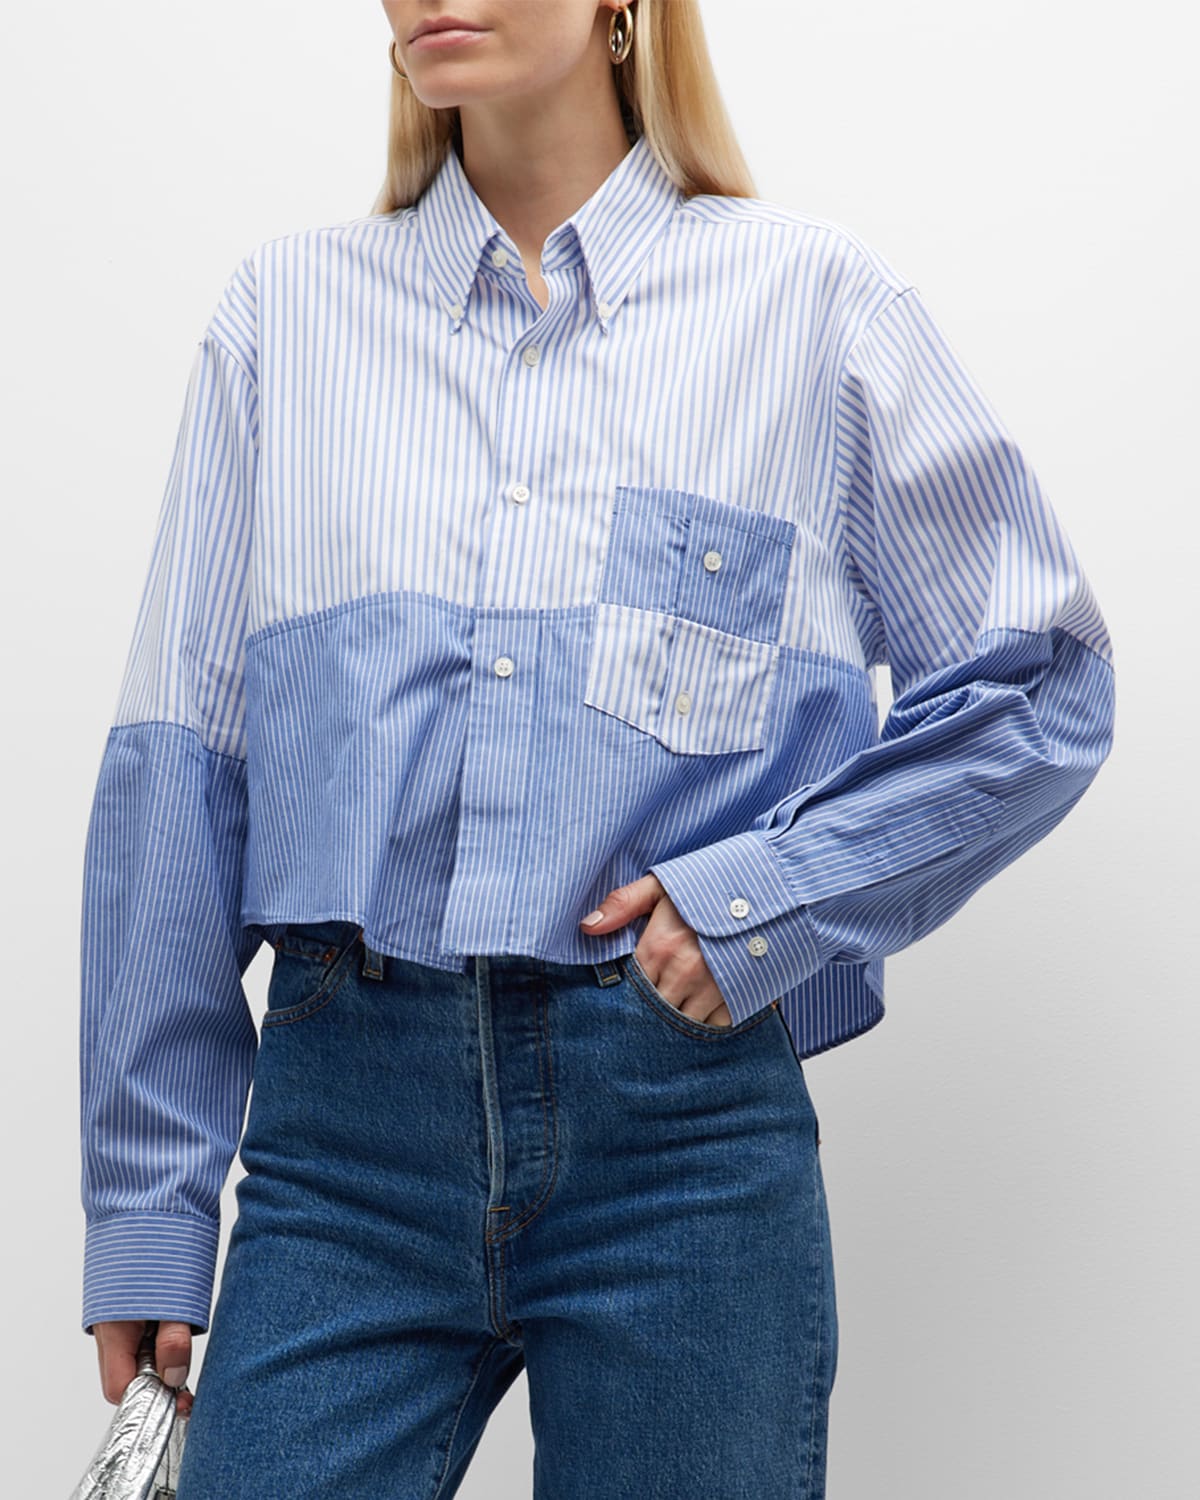 Rentrayage Gondola Cropped Patchwork Shirt - Limited Edition In Blue Stripe